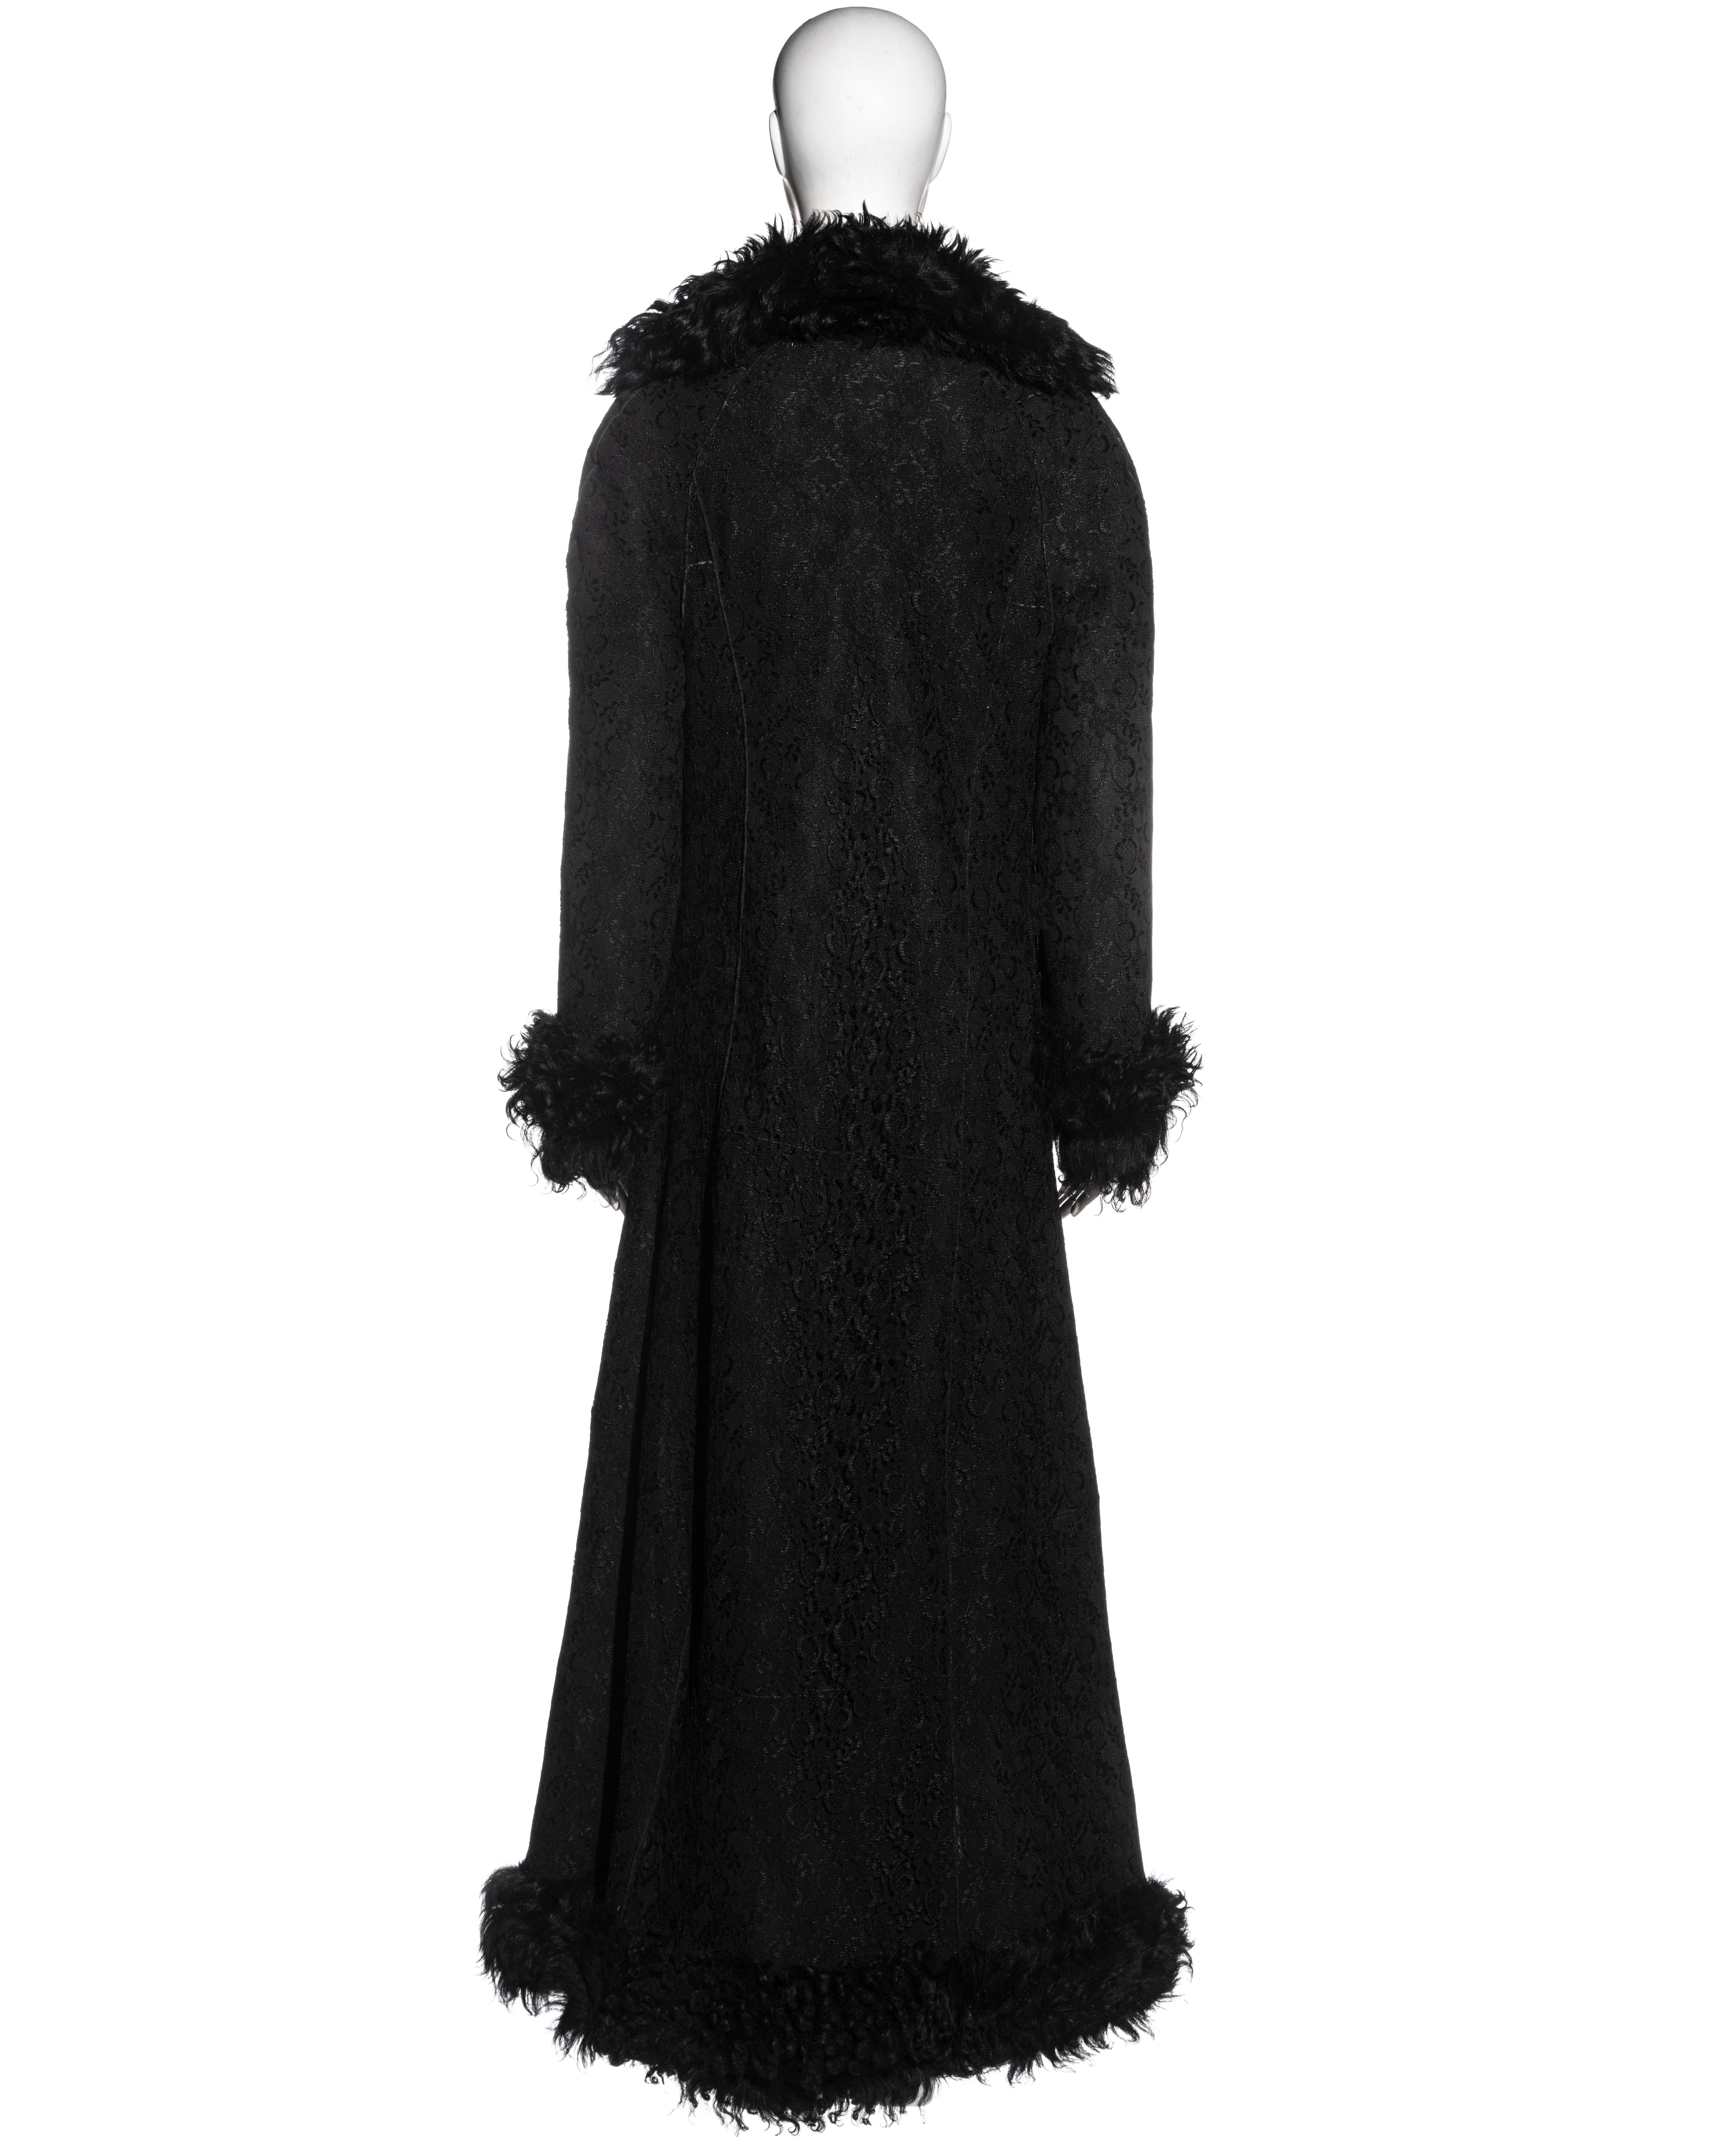 Christian Dior by John Galliano black full length lamb and lace coat, fw 2001 For Sale 1